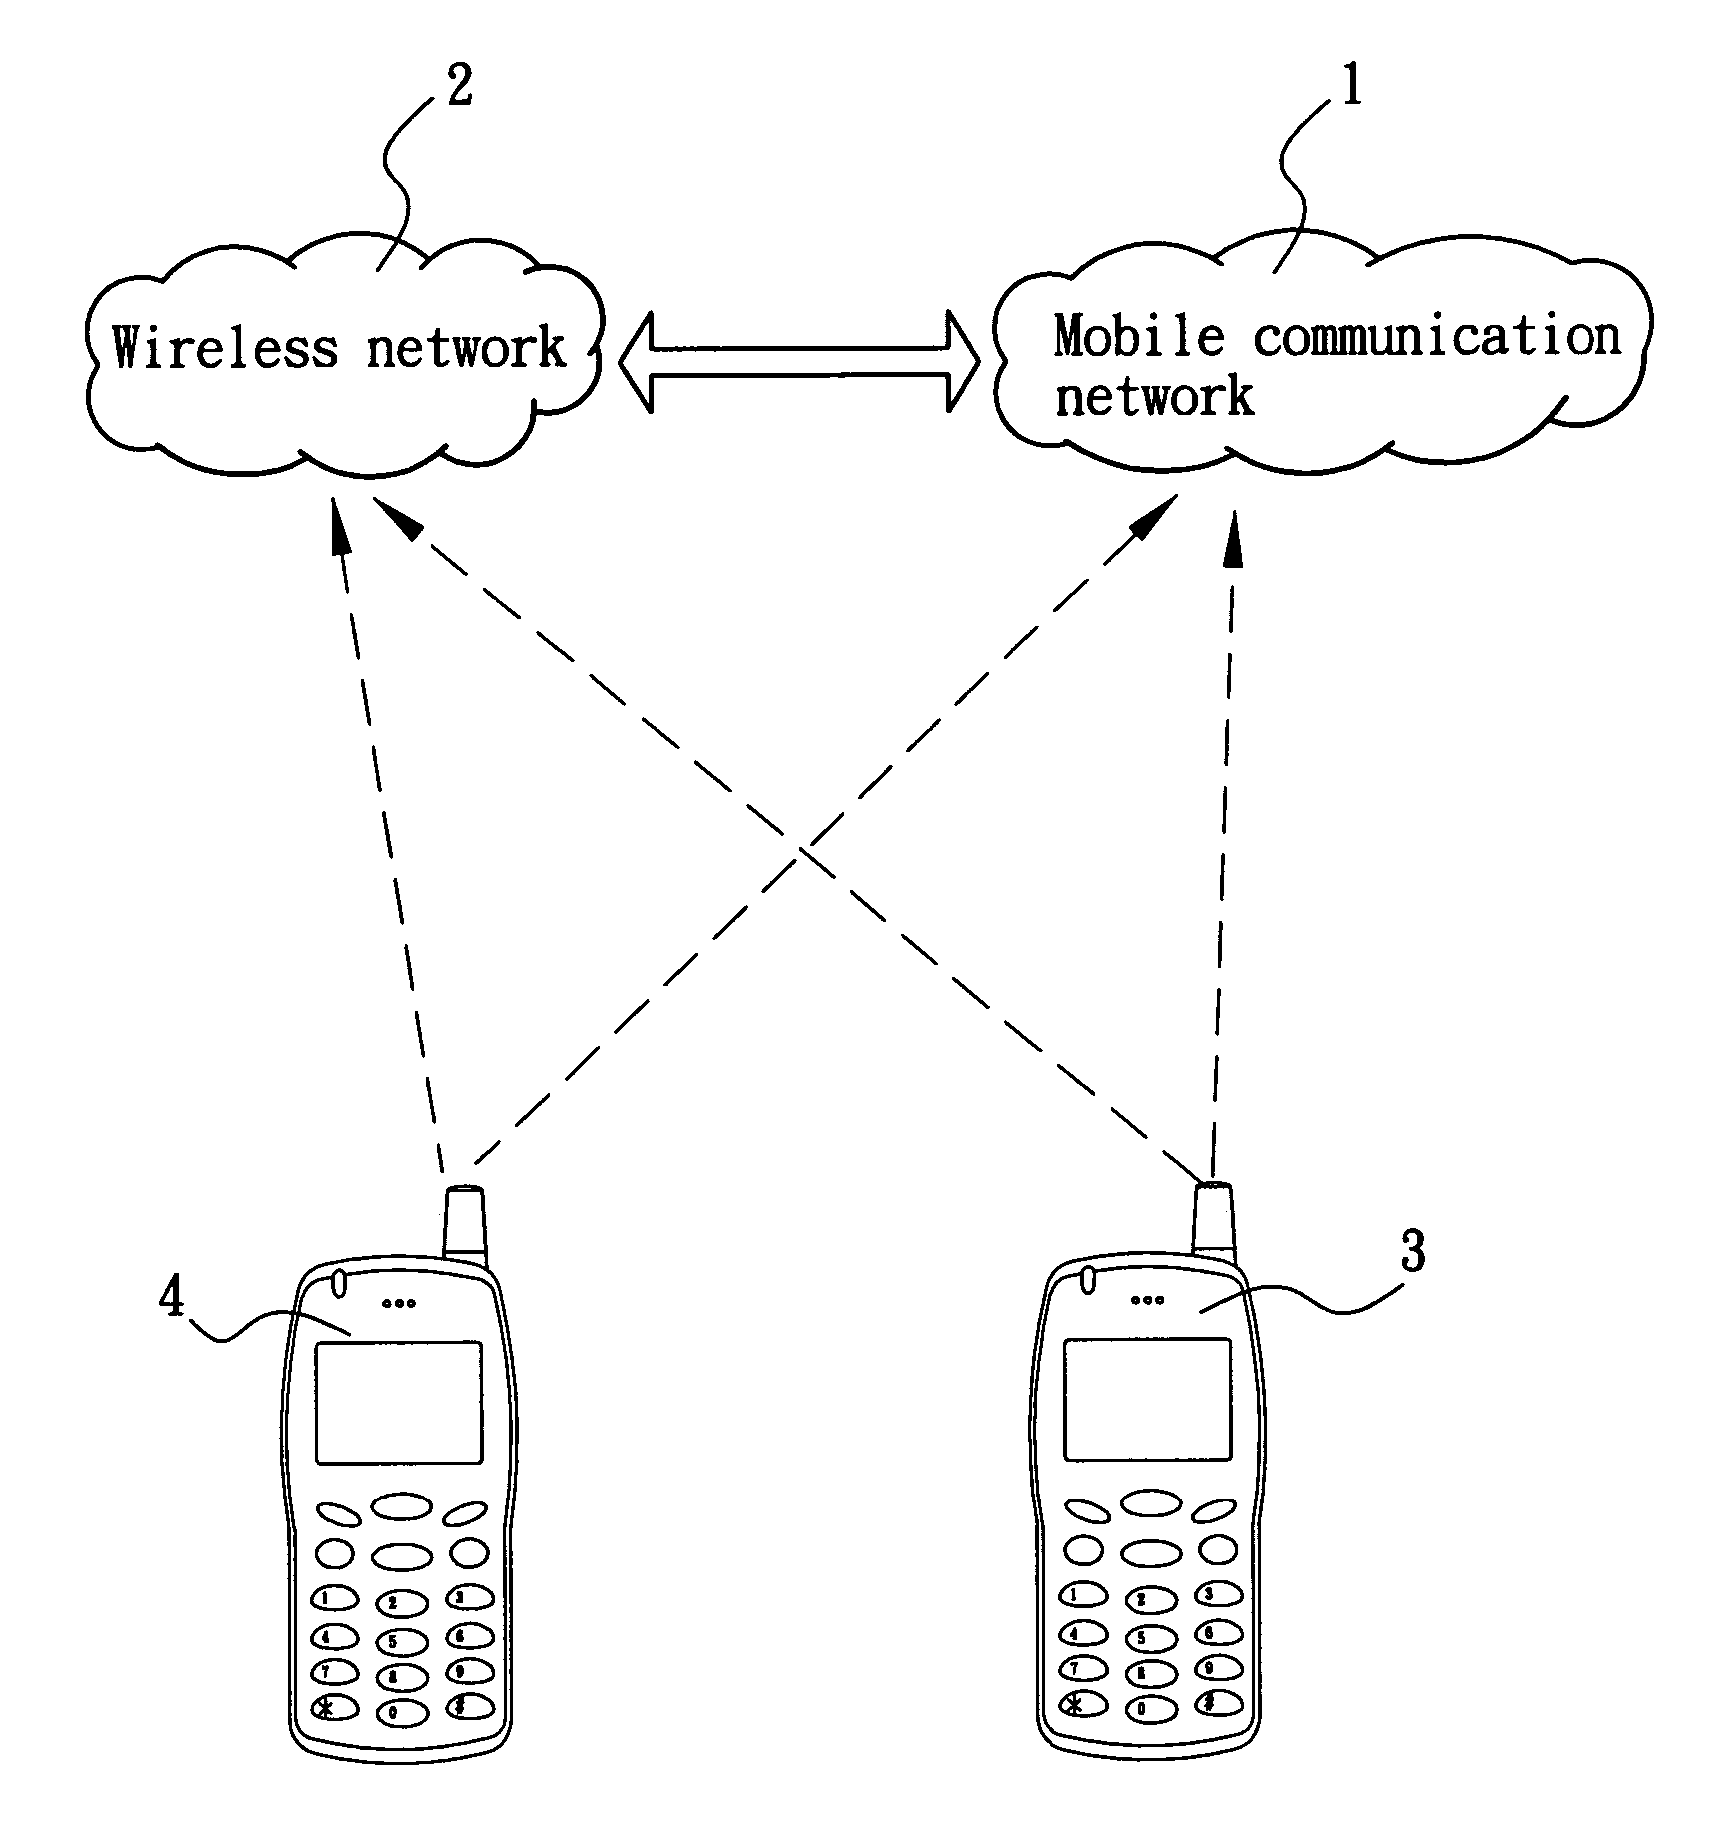 Method for selectively connecting multi-mode mobile phone with mobile communication network or wireless network